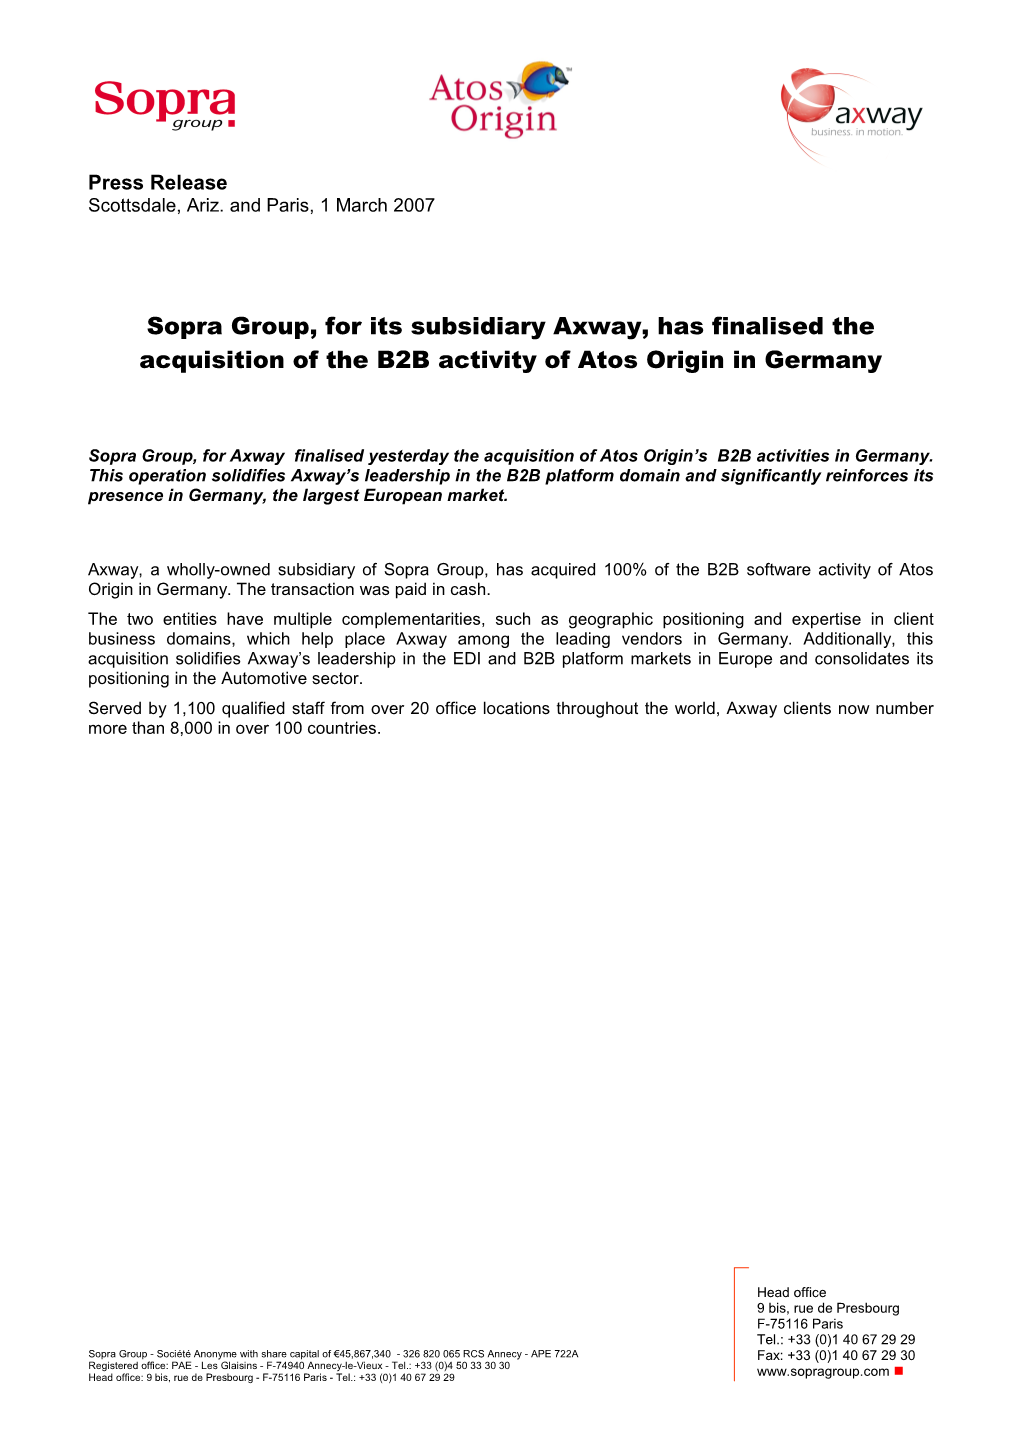 Sopra Group, for Its Subsidiary Axway, Has Finalised the Acquisition of the B2B Activity of Atos Origin in Germany